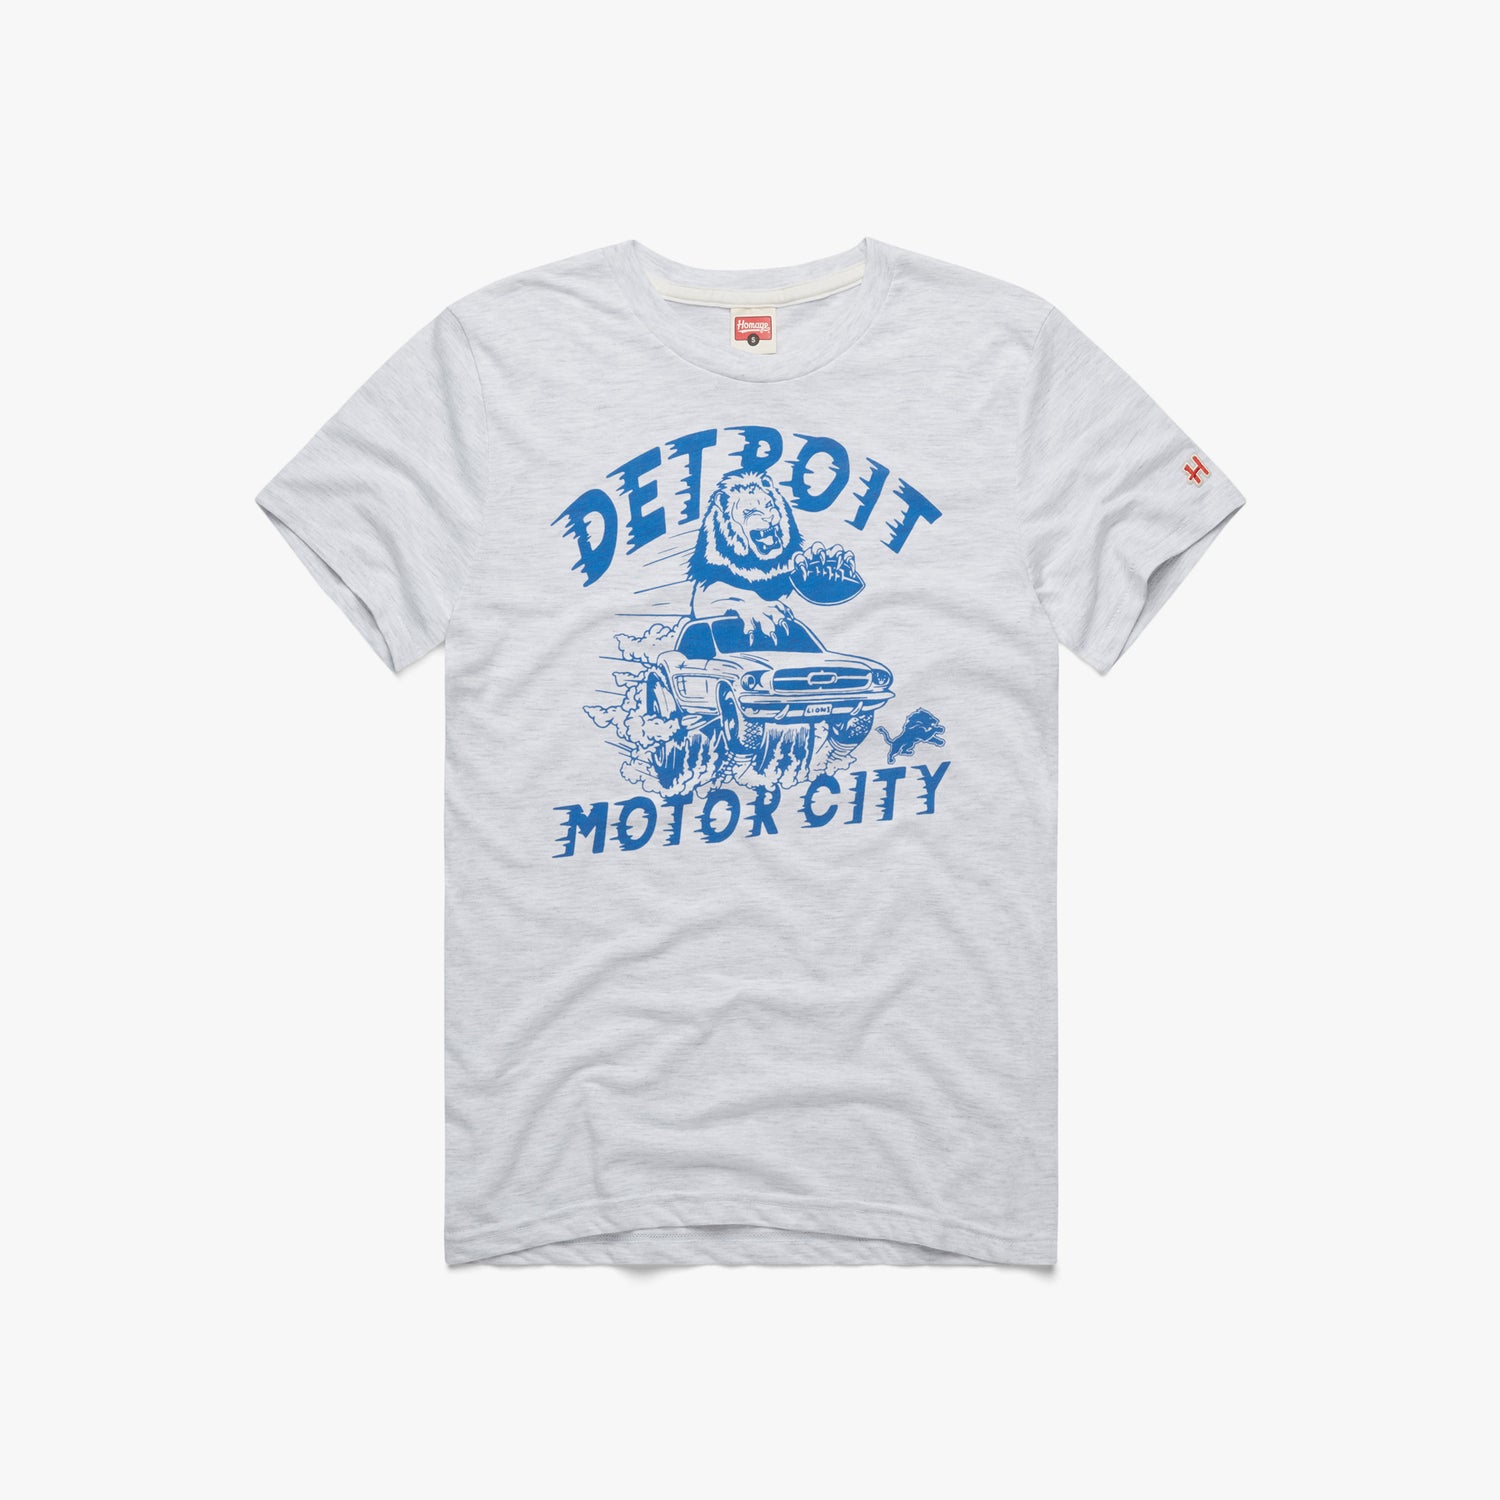 Detroit Lions Motor City T-Shirt from Homage. | Officially Licensed Vintage NFL Apparel from Homage Pro Shop.